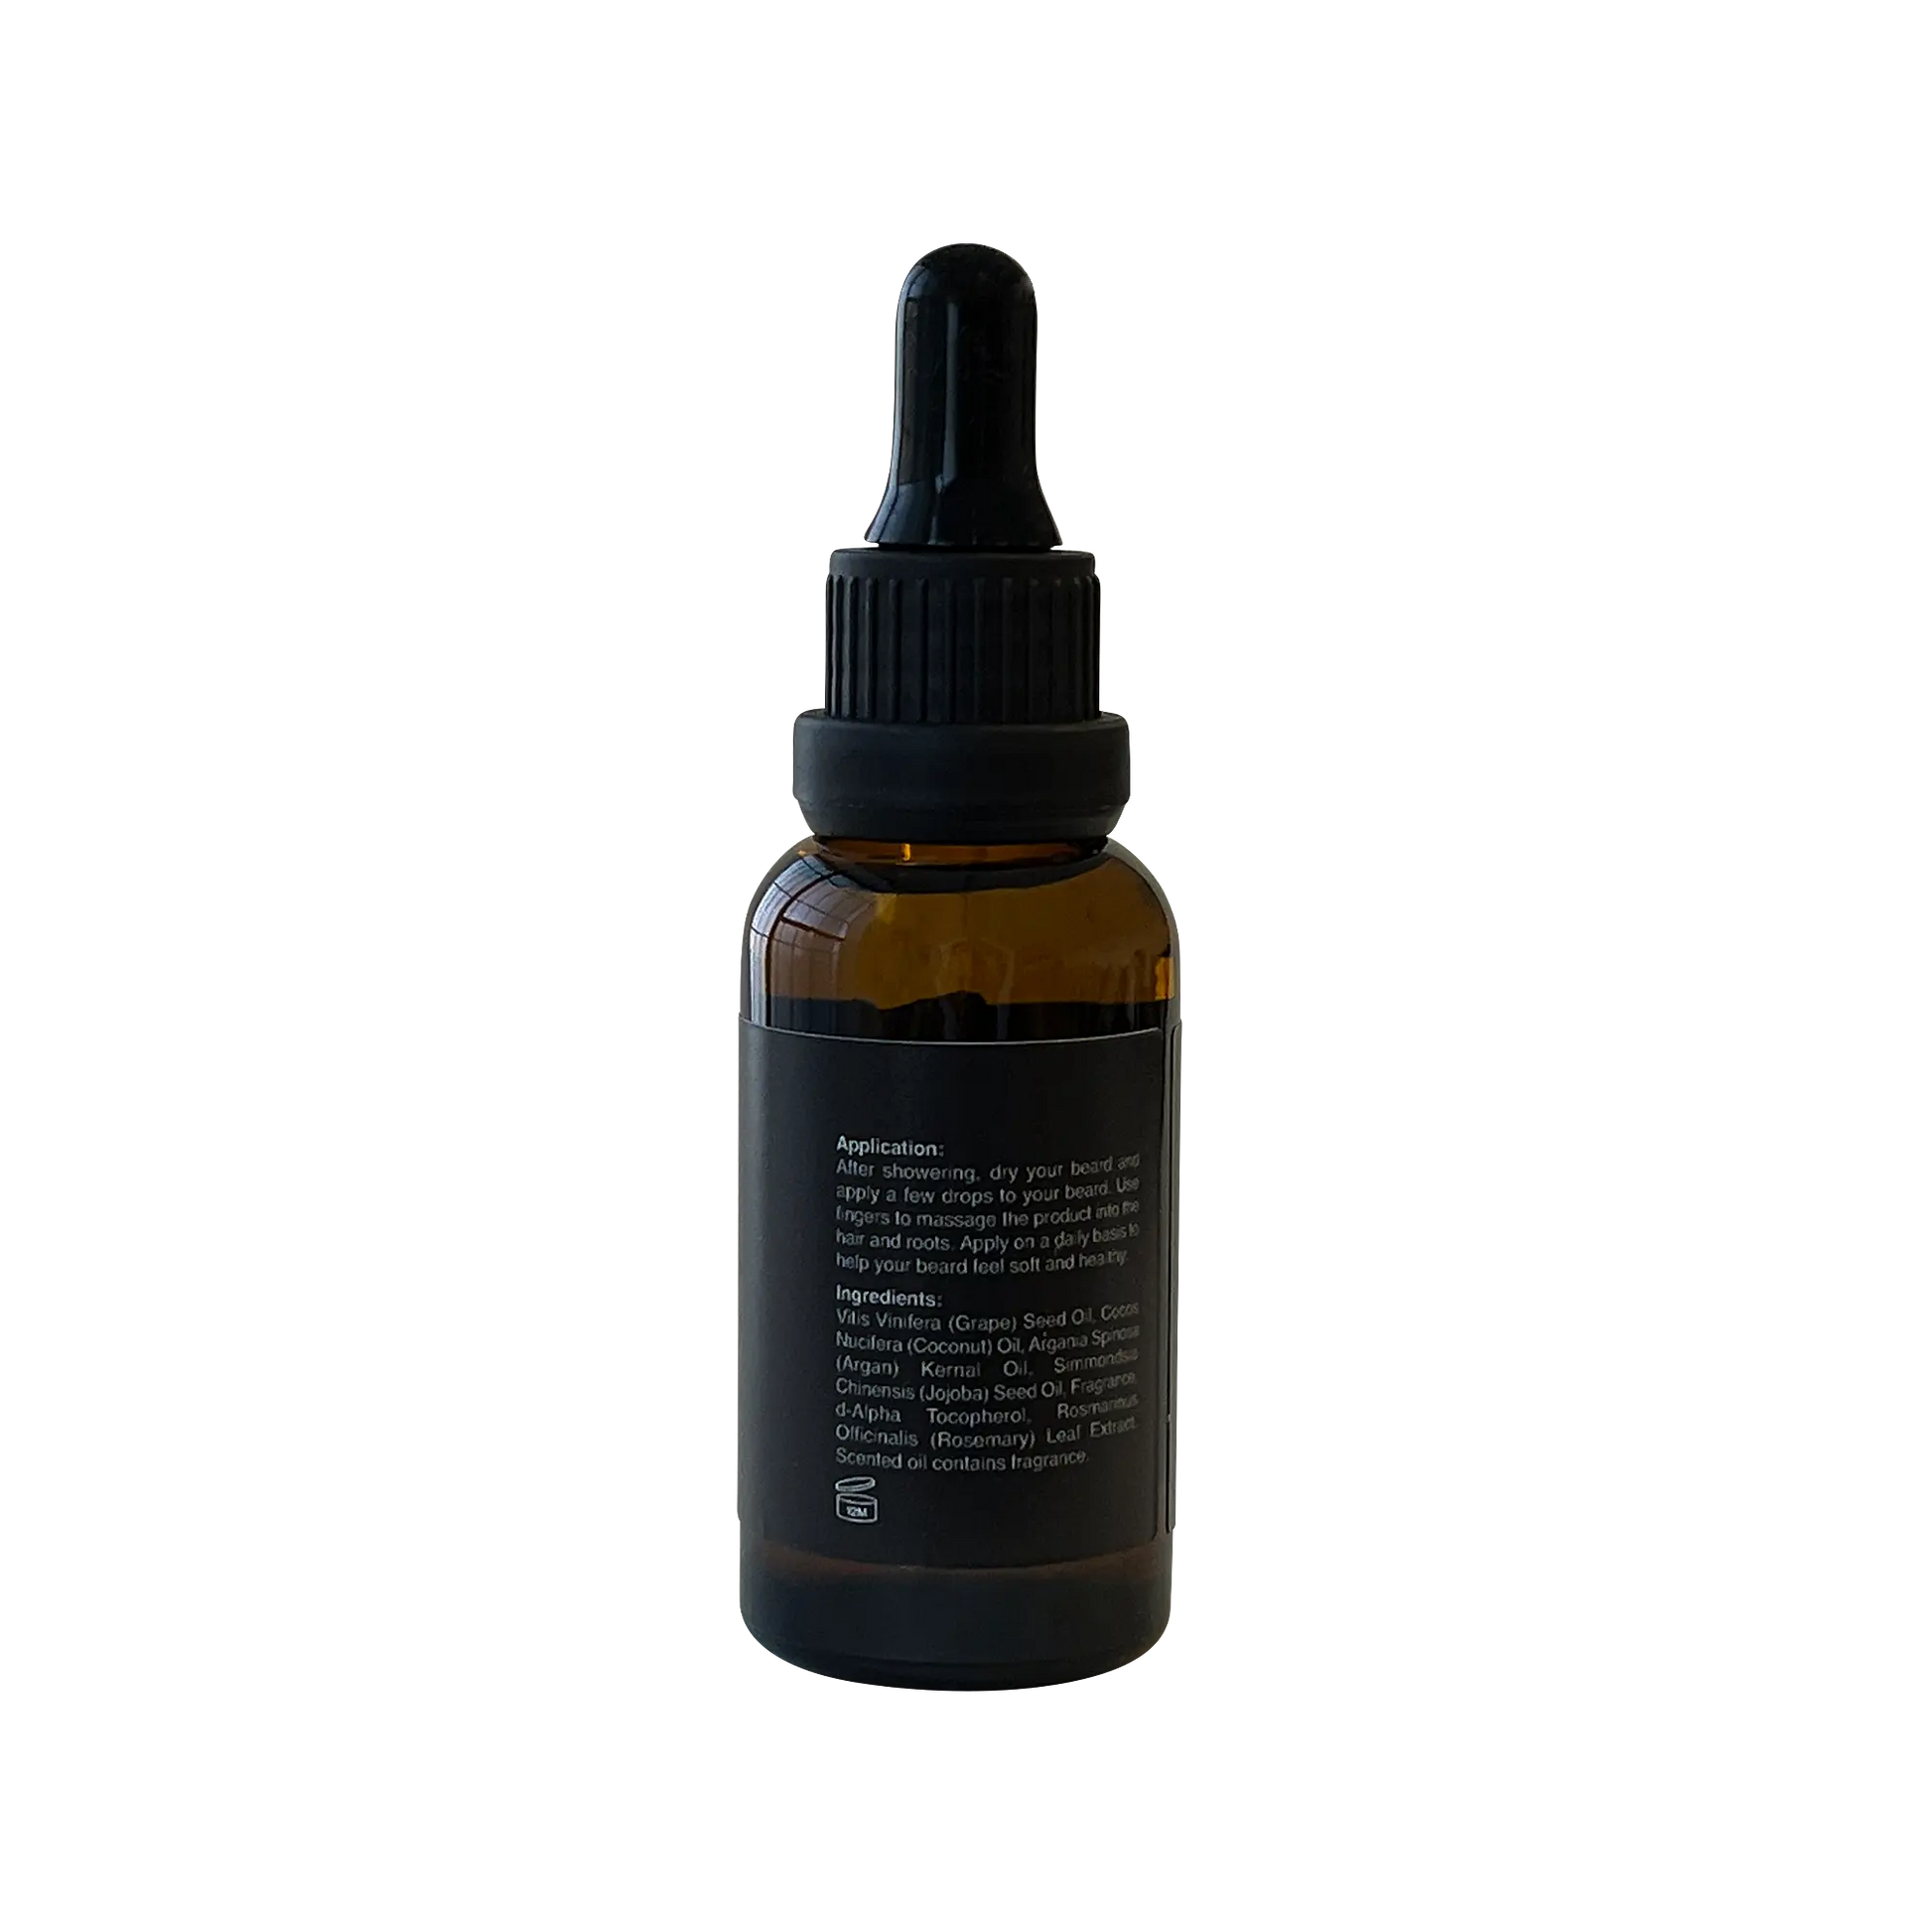 Cruisin Organics vegan beard oil not only helps your beard grow and develop, but it also softens, shapes, and nourishes it to give it the greatest possible feel and appearance.